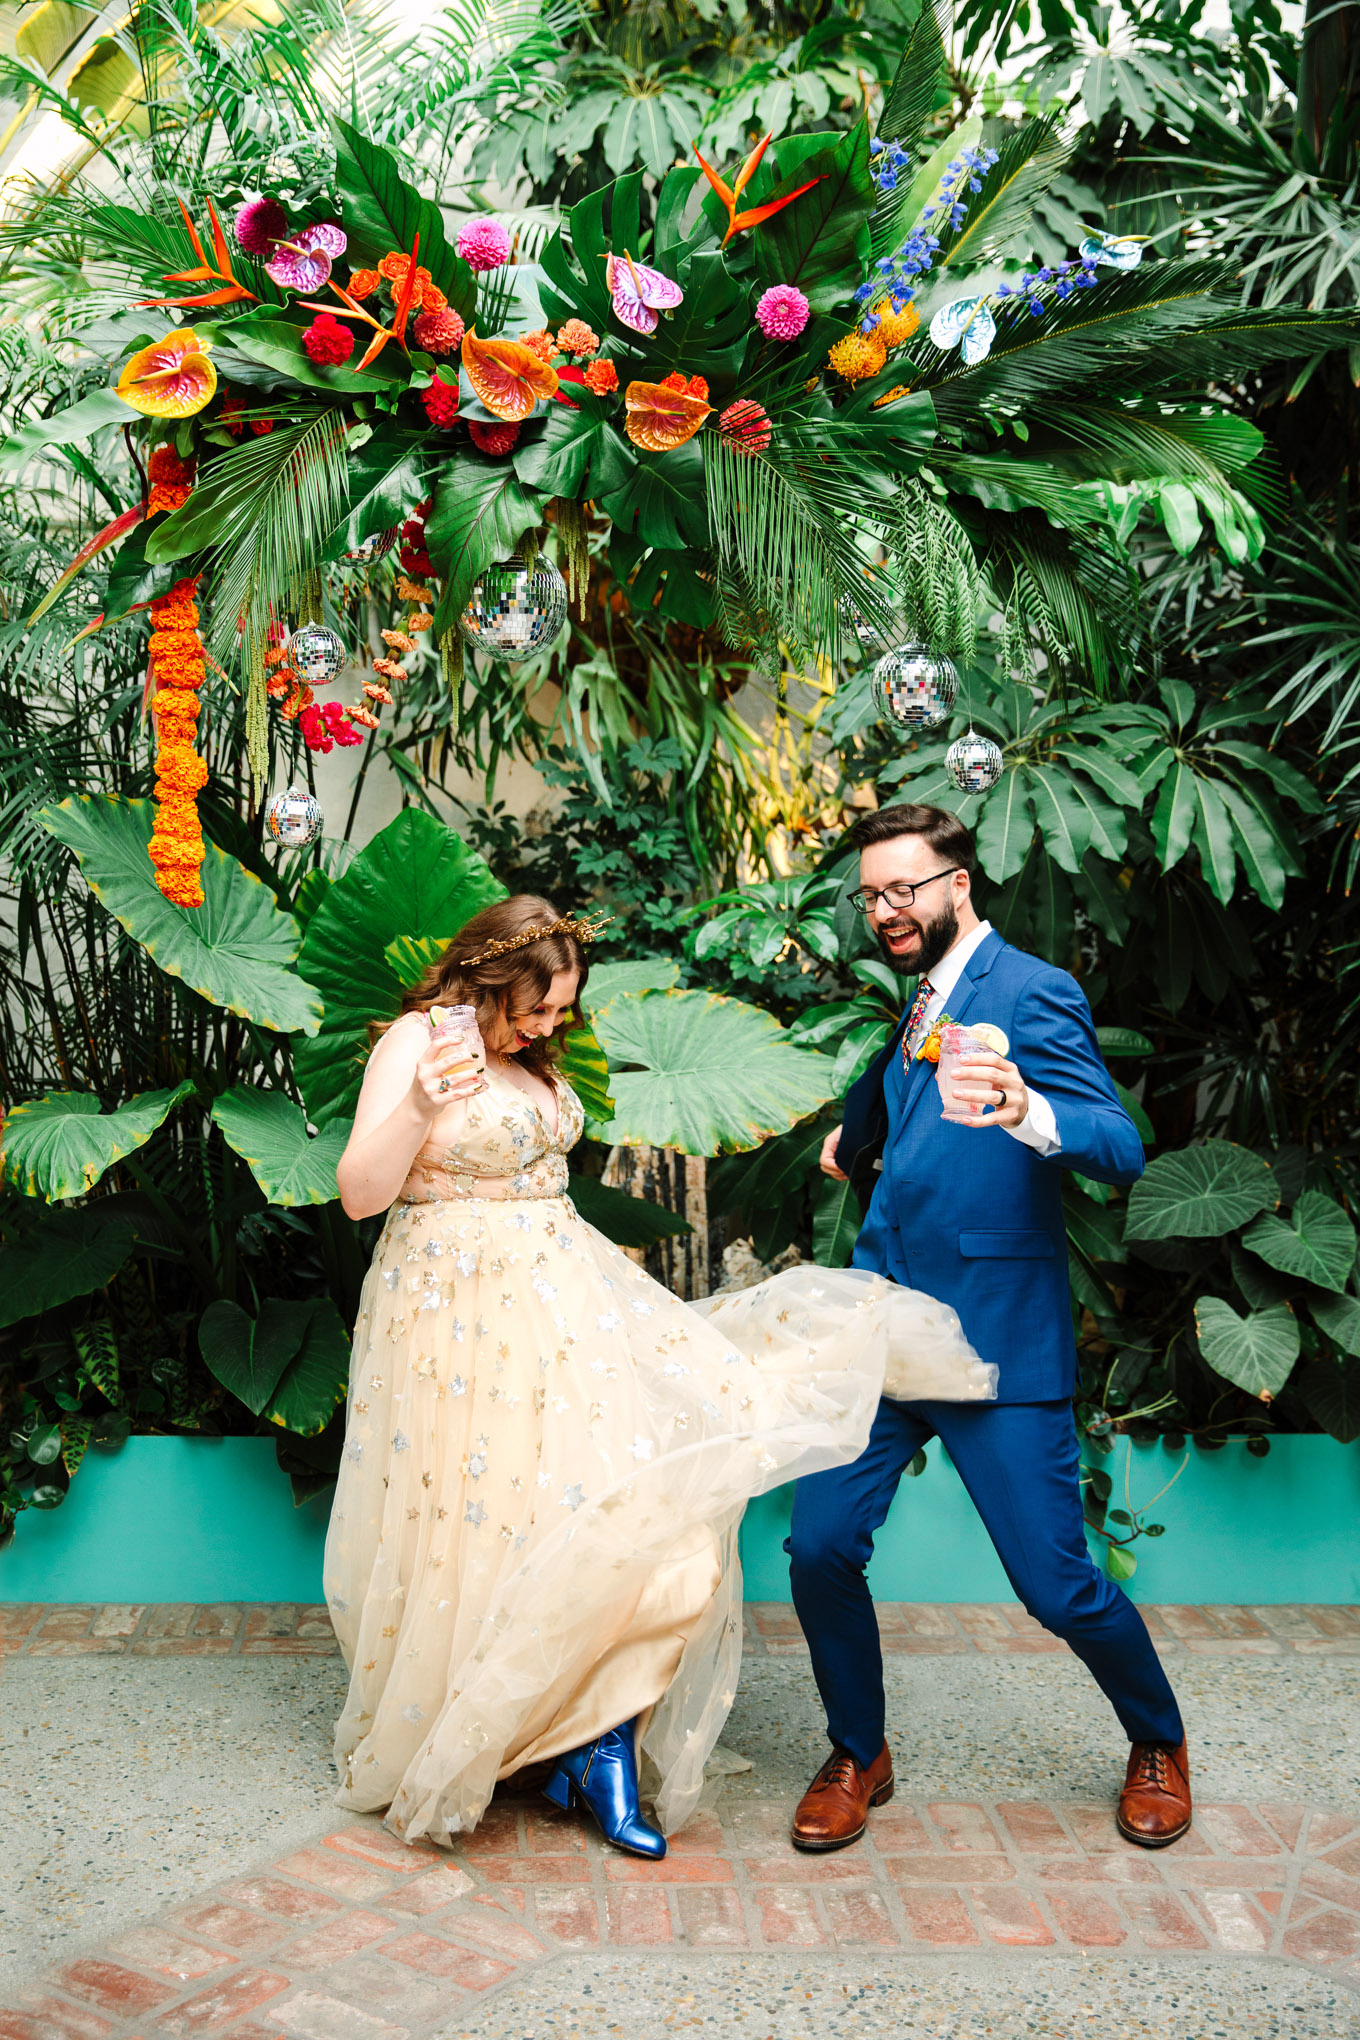 Bride and groom celebrating among tropical plants | Colorful Downtown Los Angeles Valentine Wedding | Los Angeles wedding photographer | #losangeleswedding #colorfulwedding #DTLA #valentinedtla   Source: Mary Costa Photography | Los Angeles